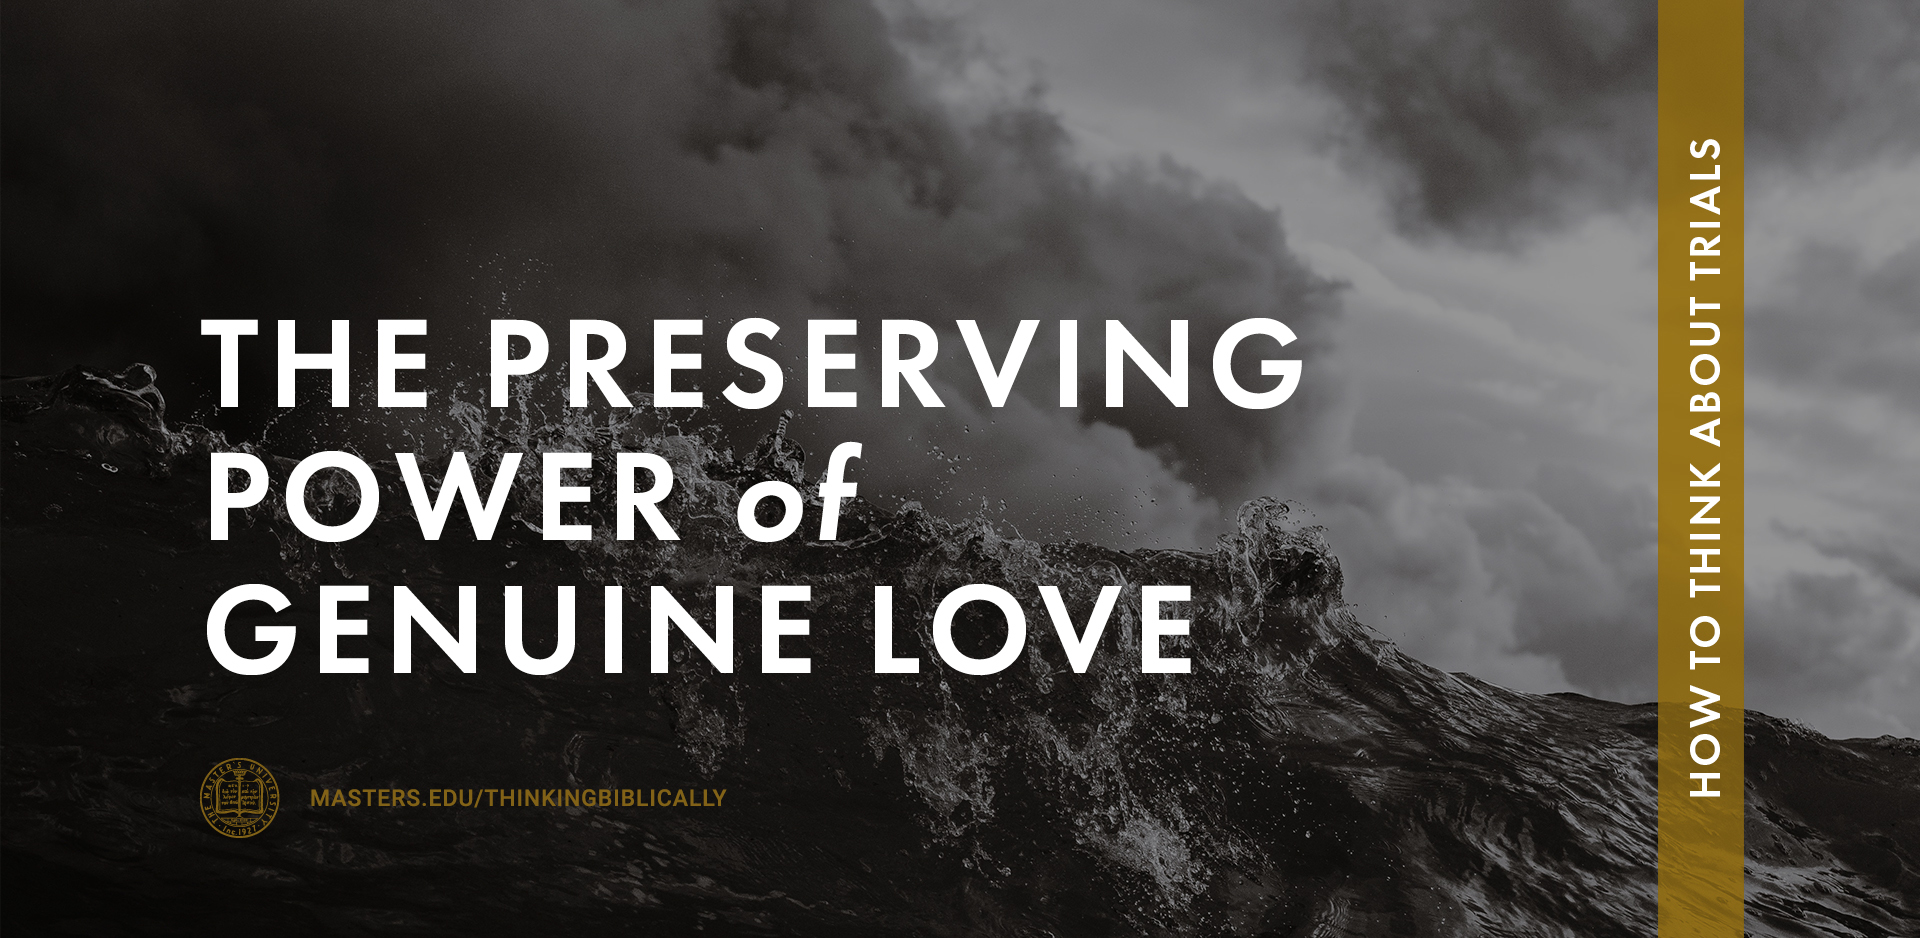 The Preserving Power of Genuine Love Featured Image